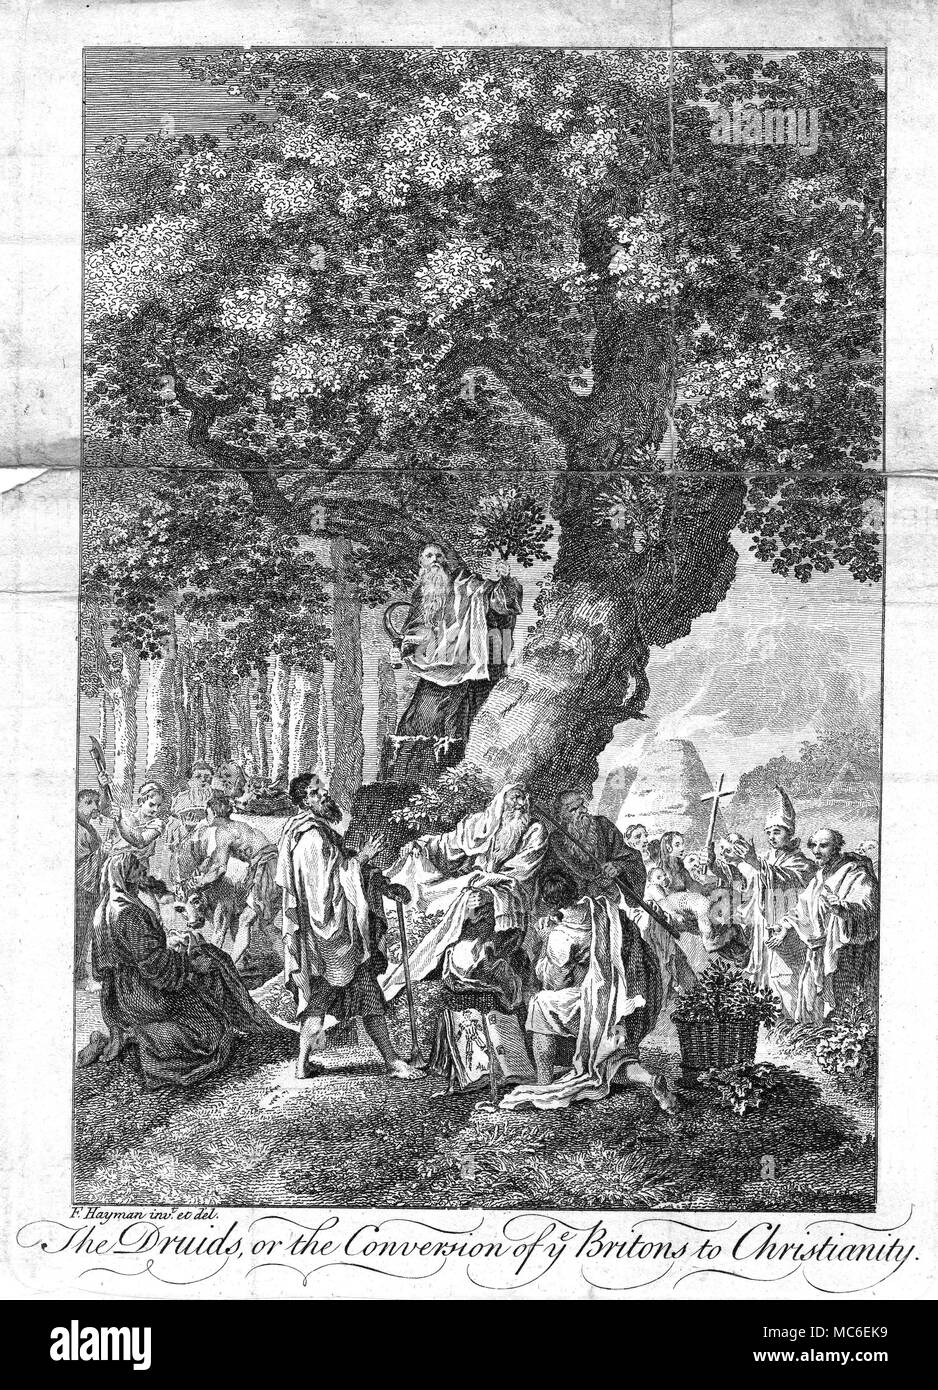 DRUIDS AND THE EARLY CHRISTIANS Engraving by Frederick Hayman, showing the Druids being converted by the early Christians to the new faith. One Druid is cutting the sacred oak bough with a silver crescent knife: in the background (left) a bull is being slaughtered to the pgan gods. The plate in the open book in the foreground depicts the Wicker Man, wrongly believed to be an instrument of death, regulated by the Druids: those condemned to death were locked in the giant model of a human being, made from wickerwork: the whole thing was set on fire, and burned to ashes. A colour print Stock Photo